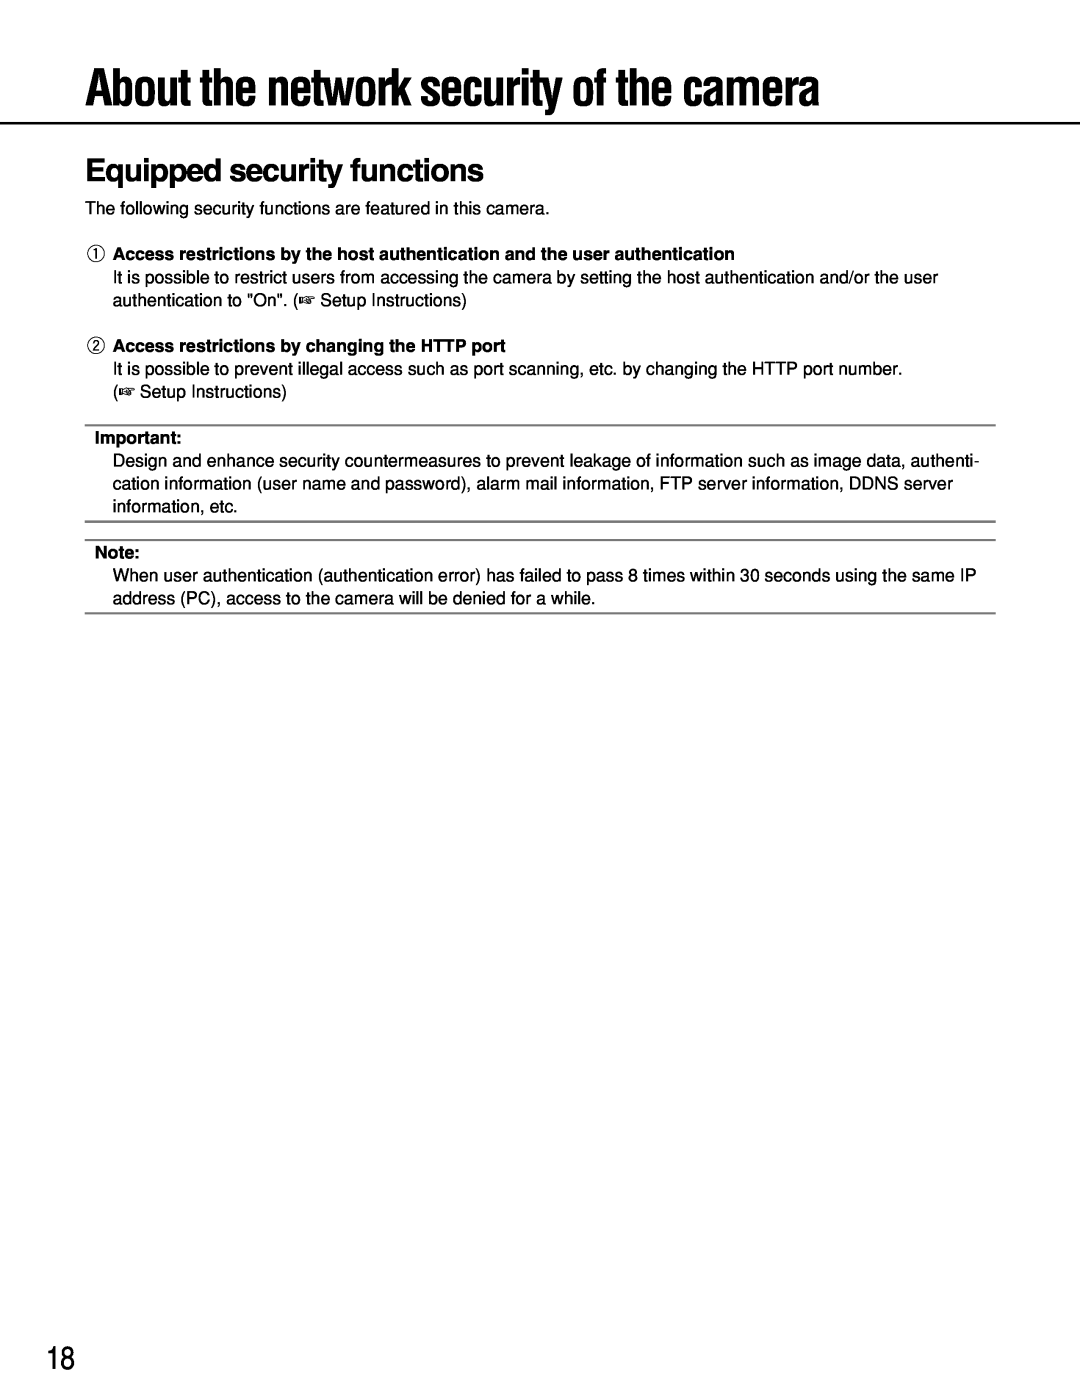 Panasonic WV-NP304 operating instructions About the network security of the camera, Equipped security functions 